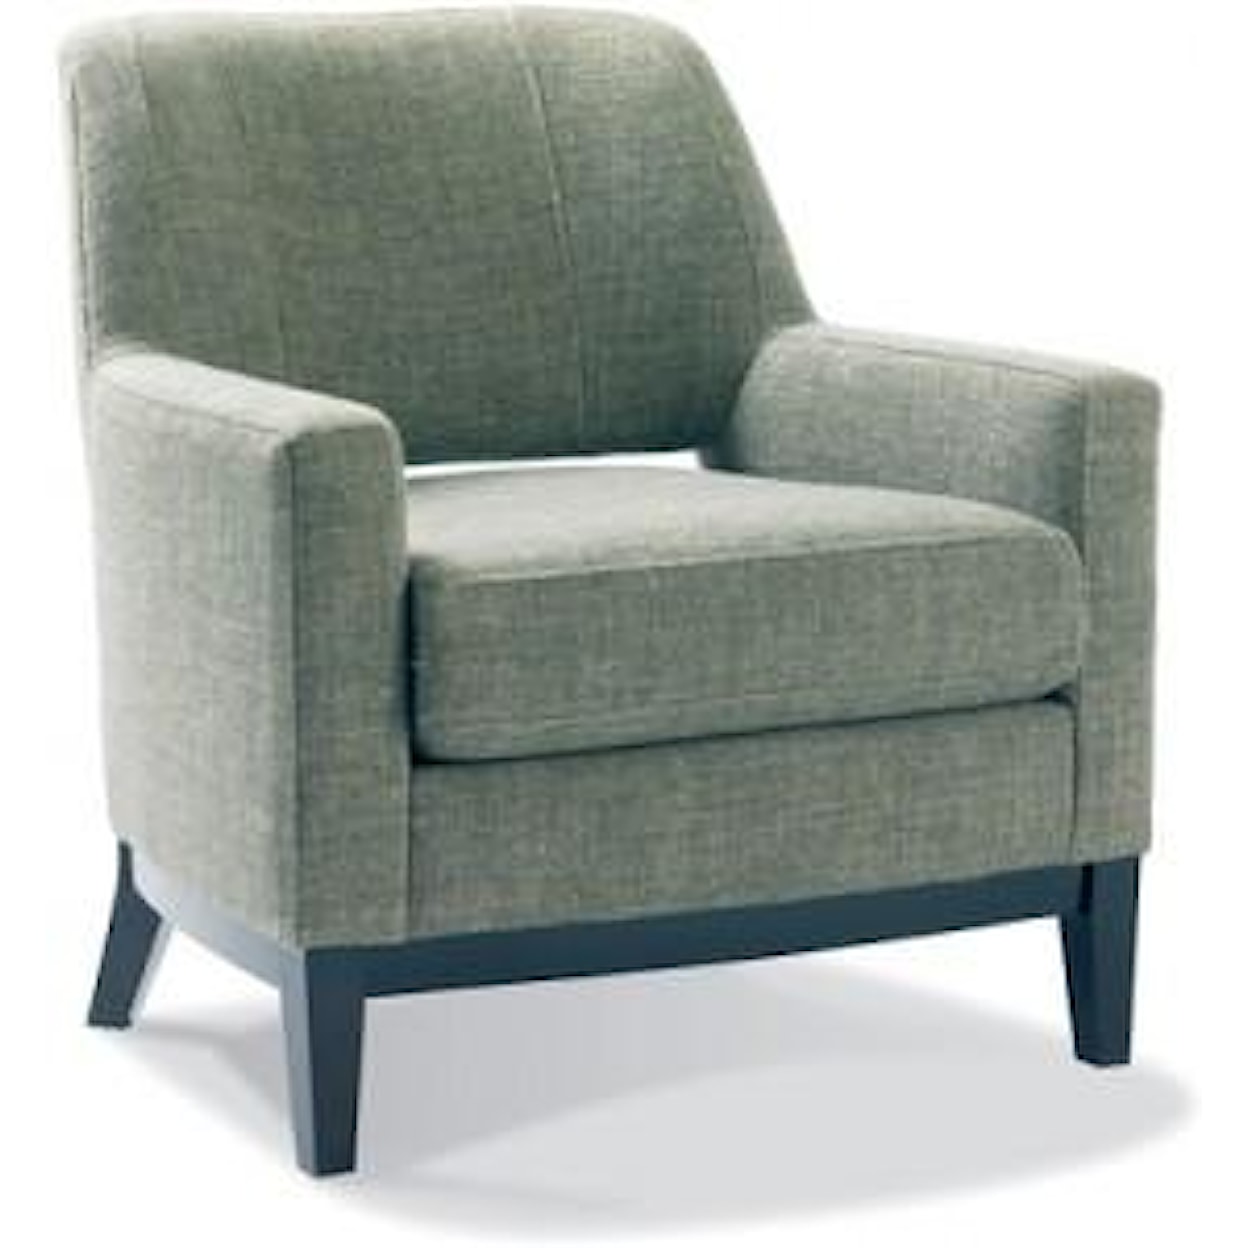 Precedent Accent Chairs Chair